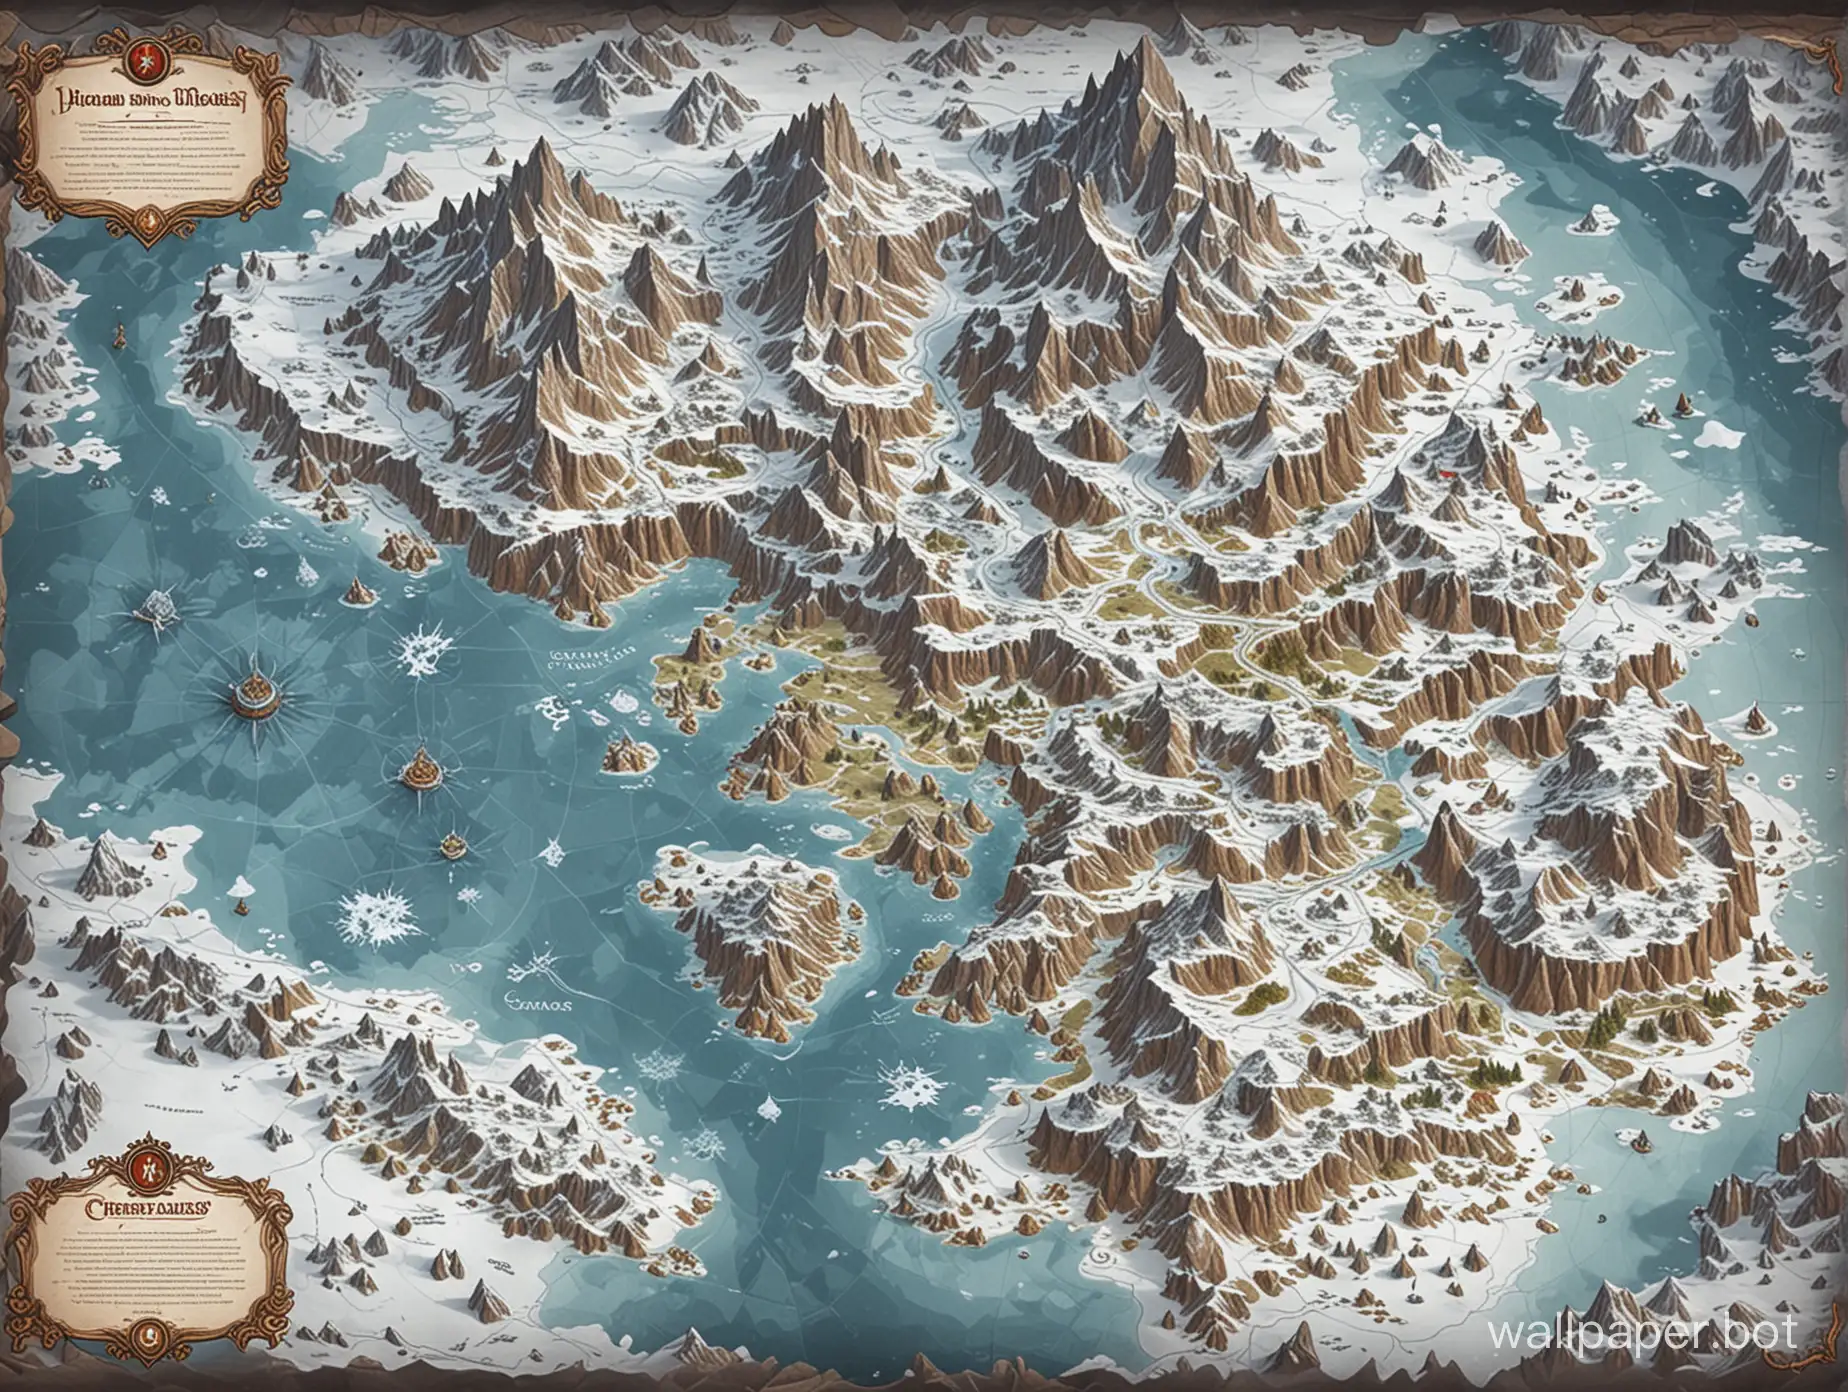 Fantasy-World-Map-Dungeons-Dragons-Style-with-Varied-Landscapes-and-Snowy-Regions